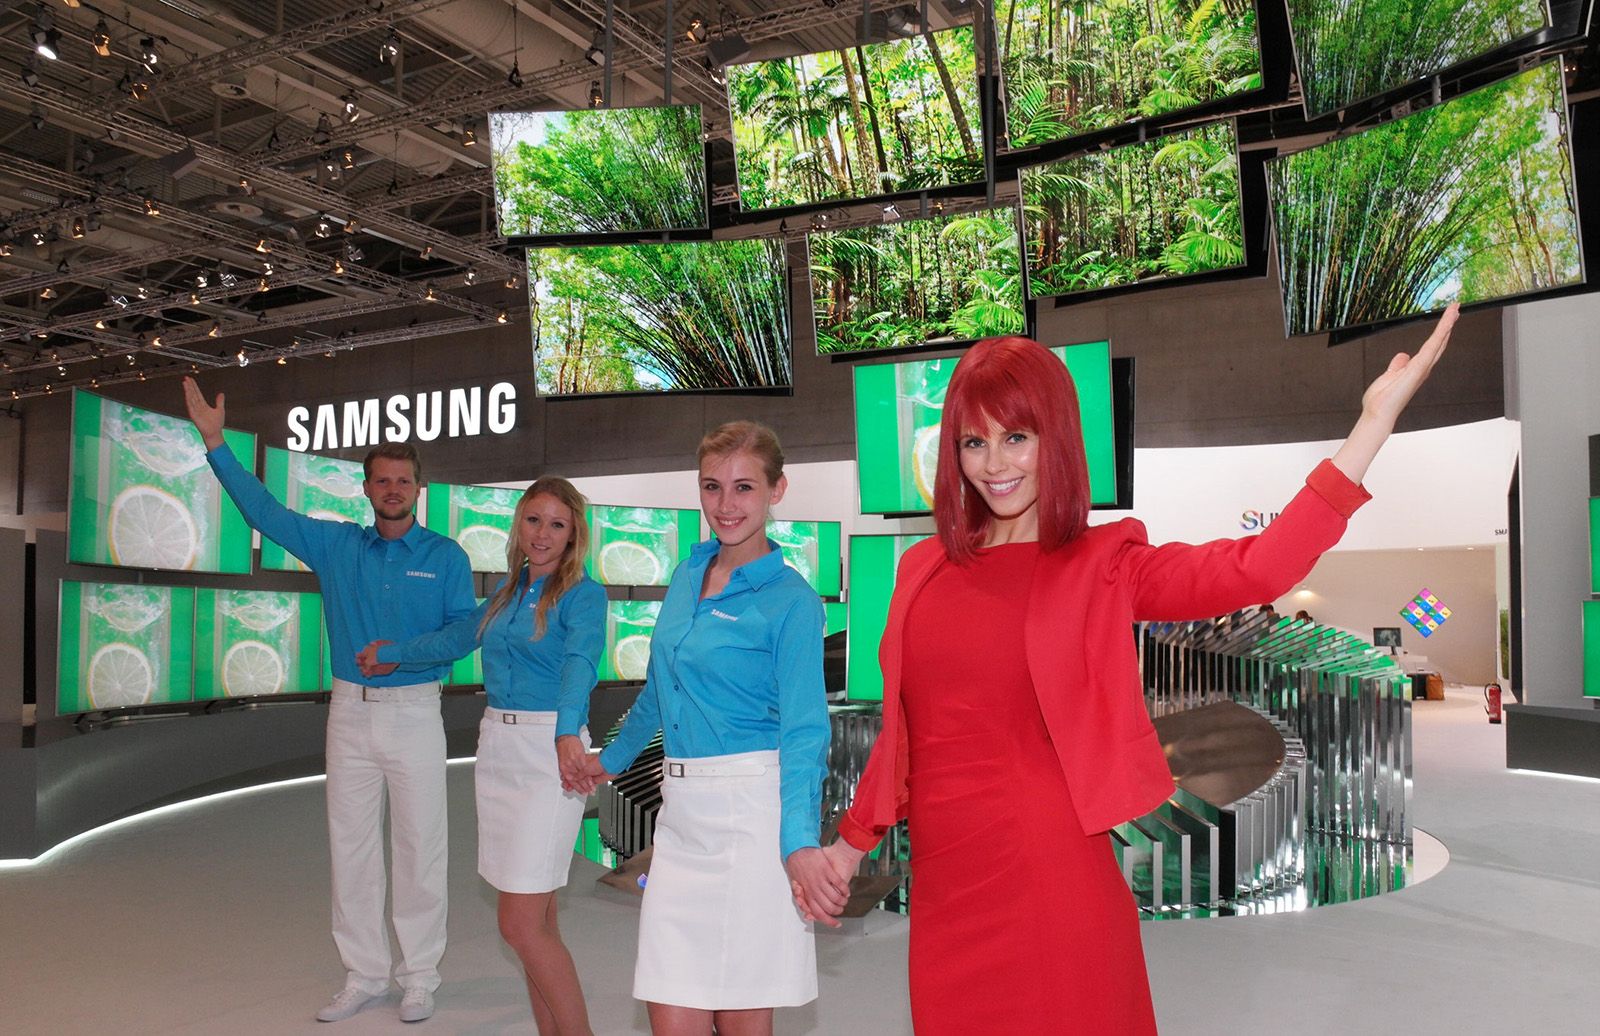 samsung 4k ultra hd blu ray player and new curved suhd tvs with hdr debut at ifa 2015 image 1